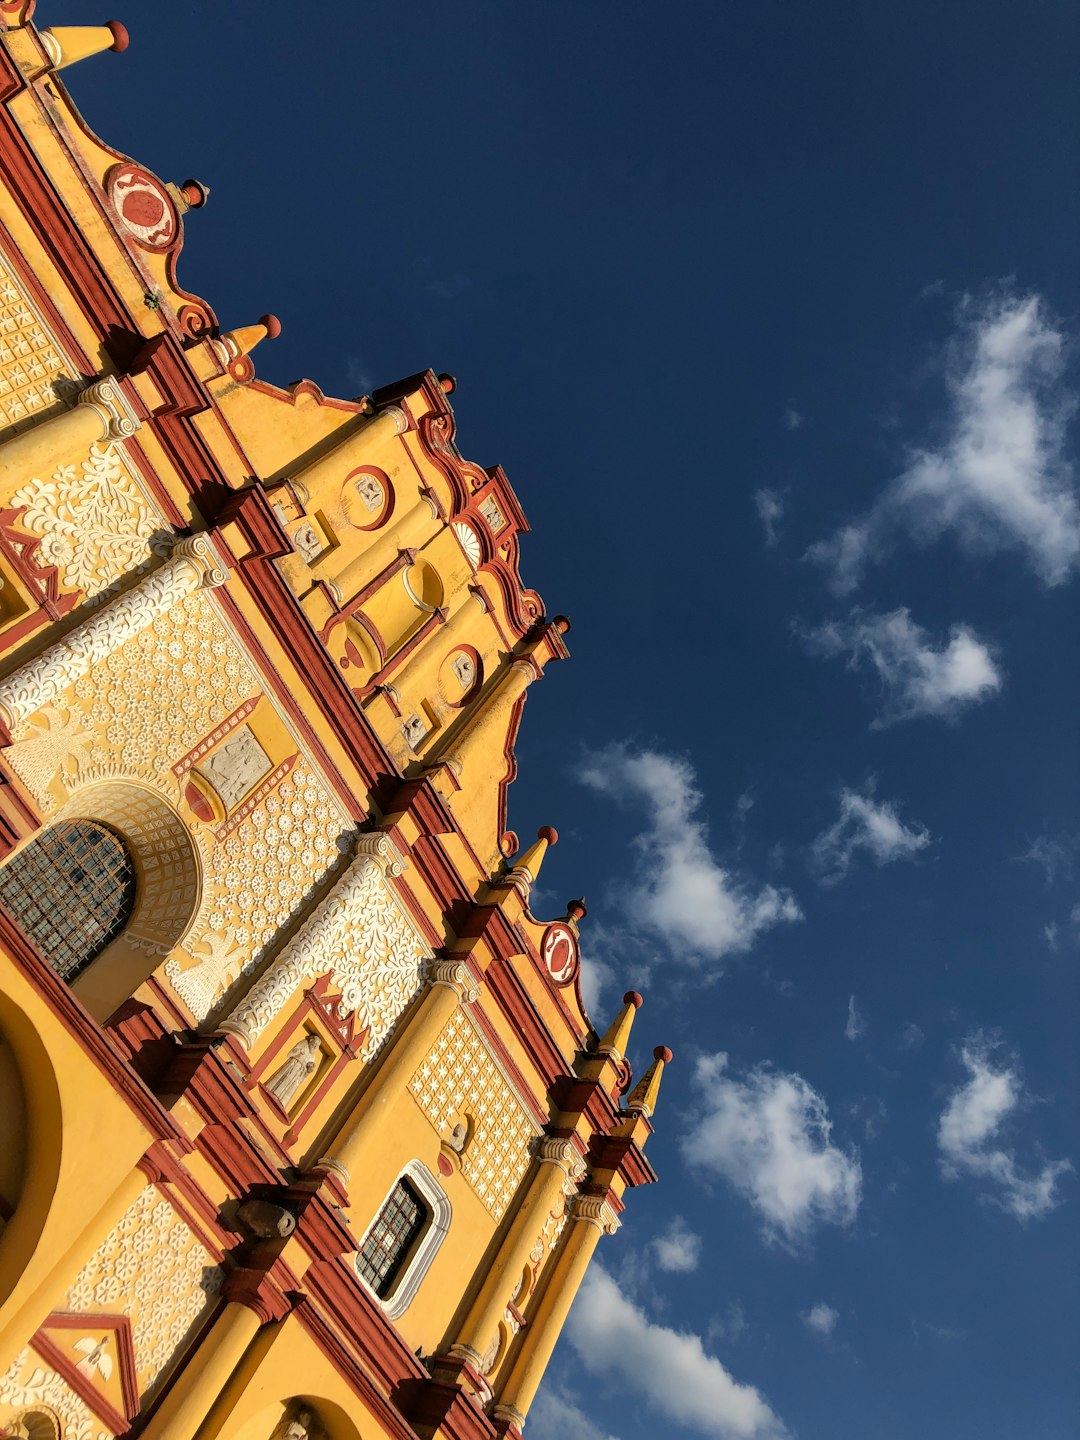 Travel Tips and Stories of Plaza de la Paz in Mexico